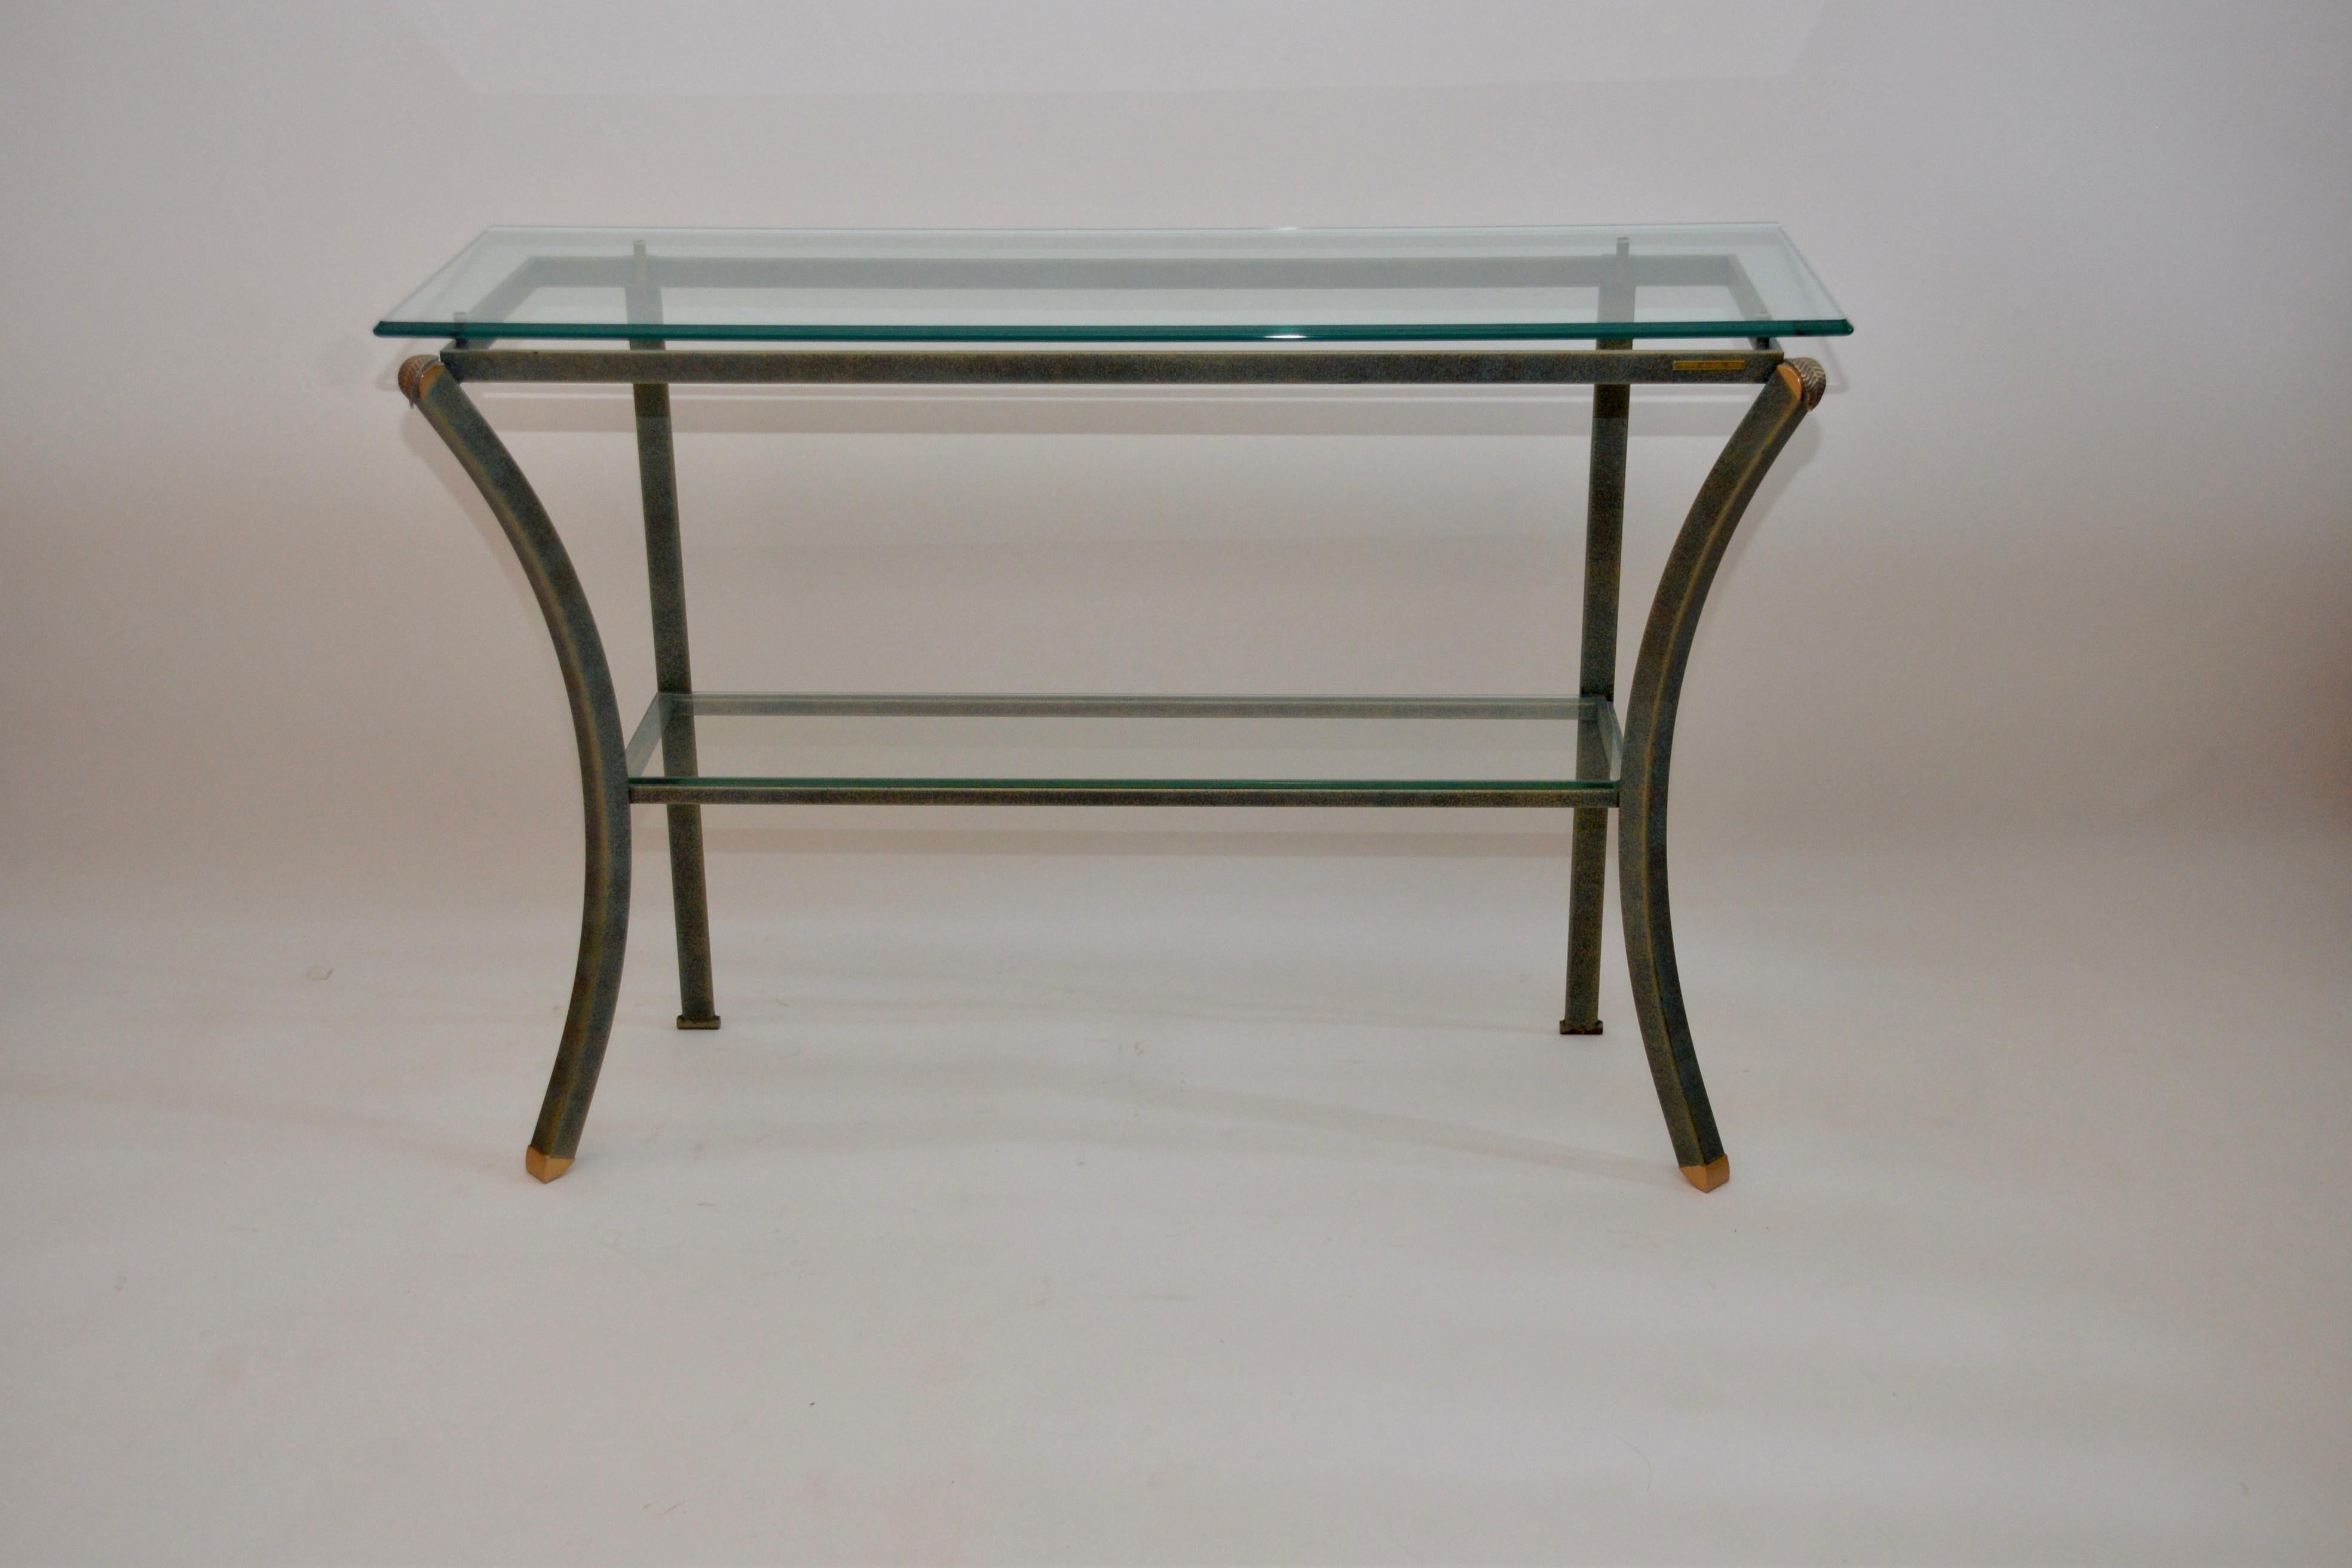 Vintage Pierre Vandel console table in a green and gold finish. This item has brass feet and a pretty brass leaf design on each of the top corner castings. An original beveled glass top with a shelf below. A unique Classic 1970s Pierre Vandel design